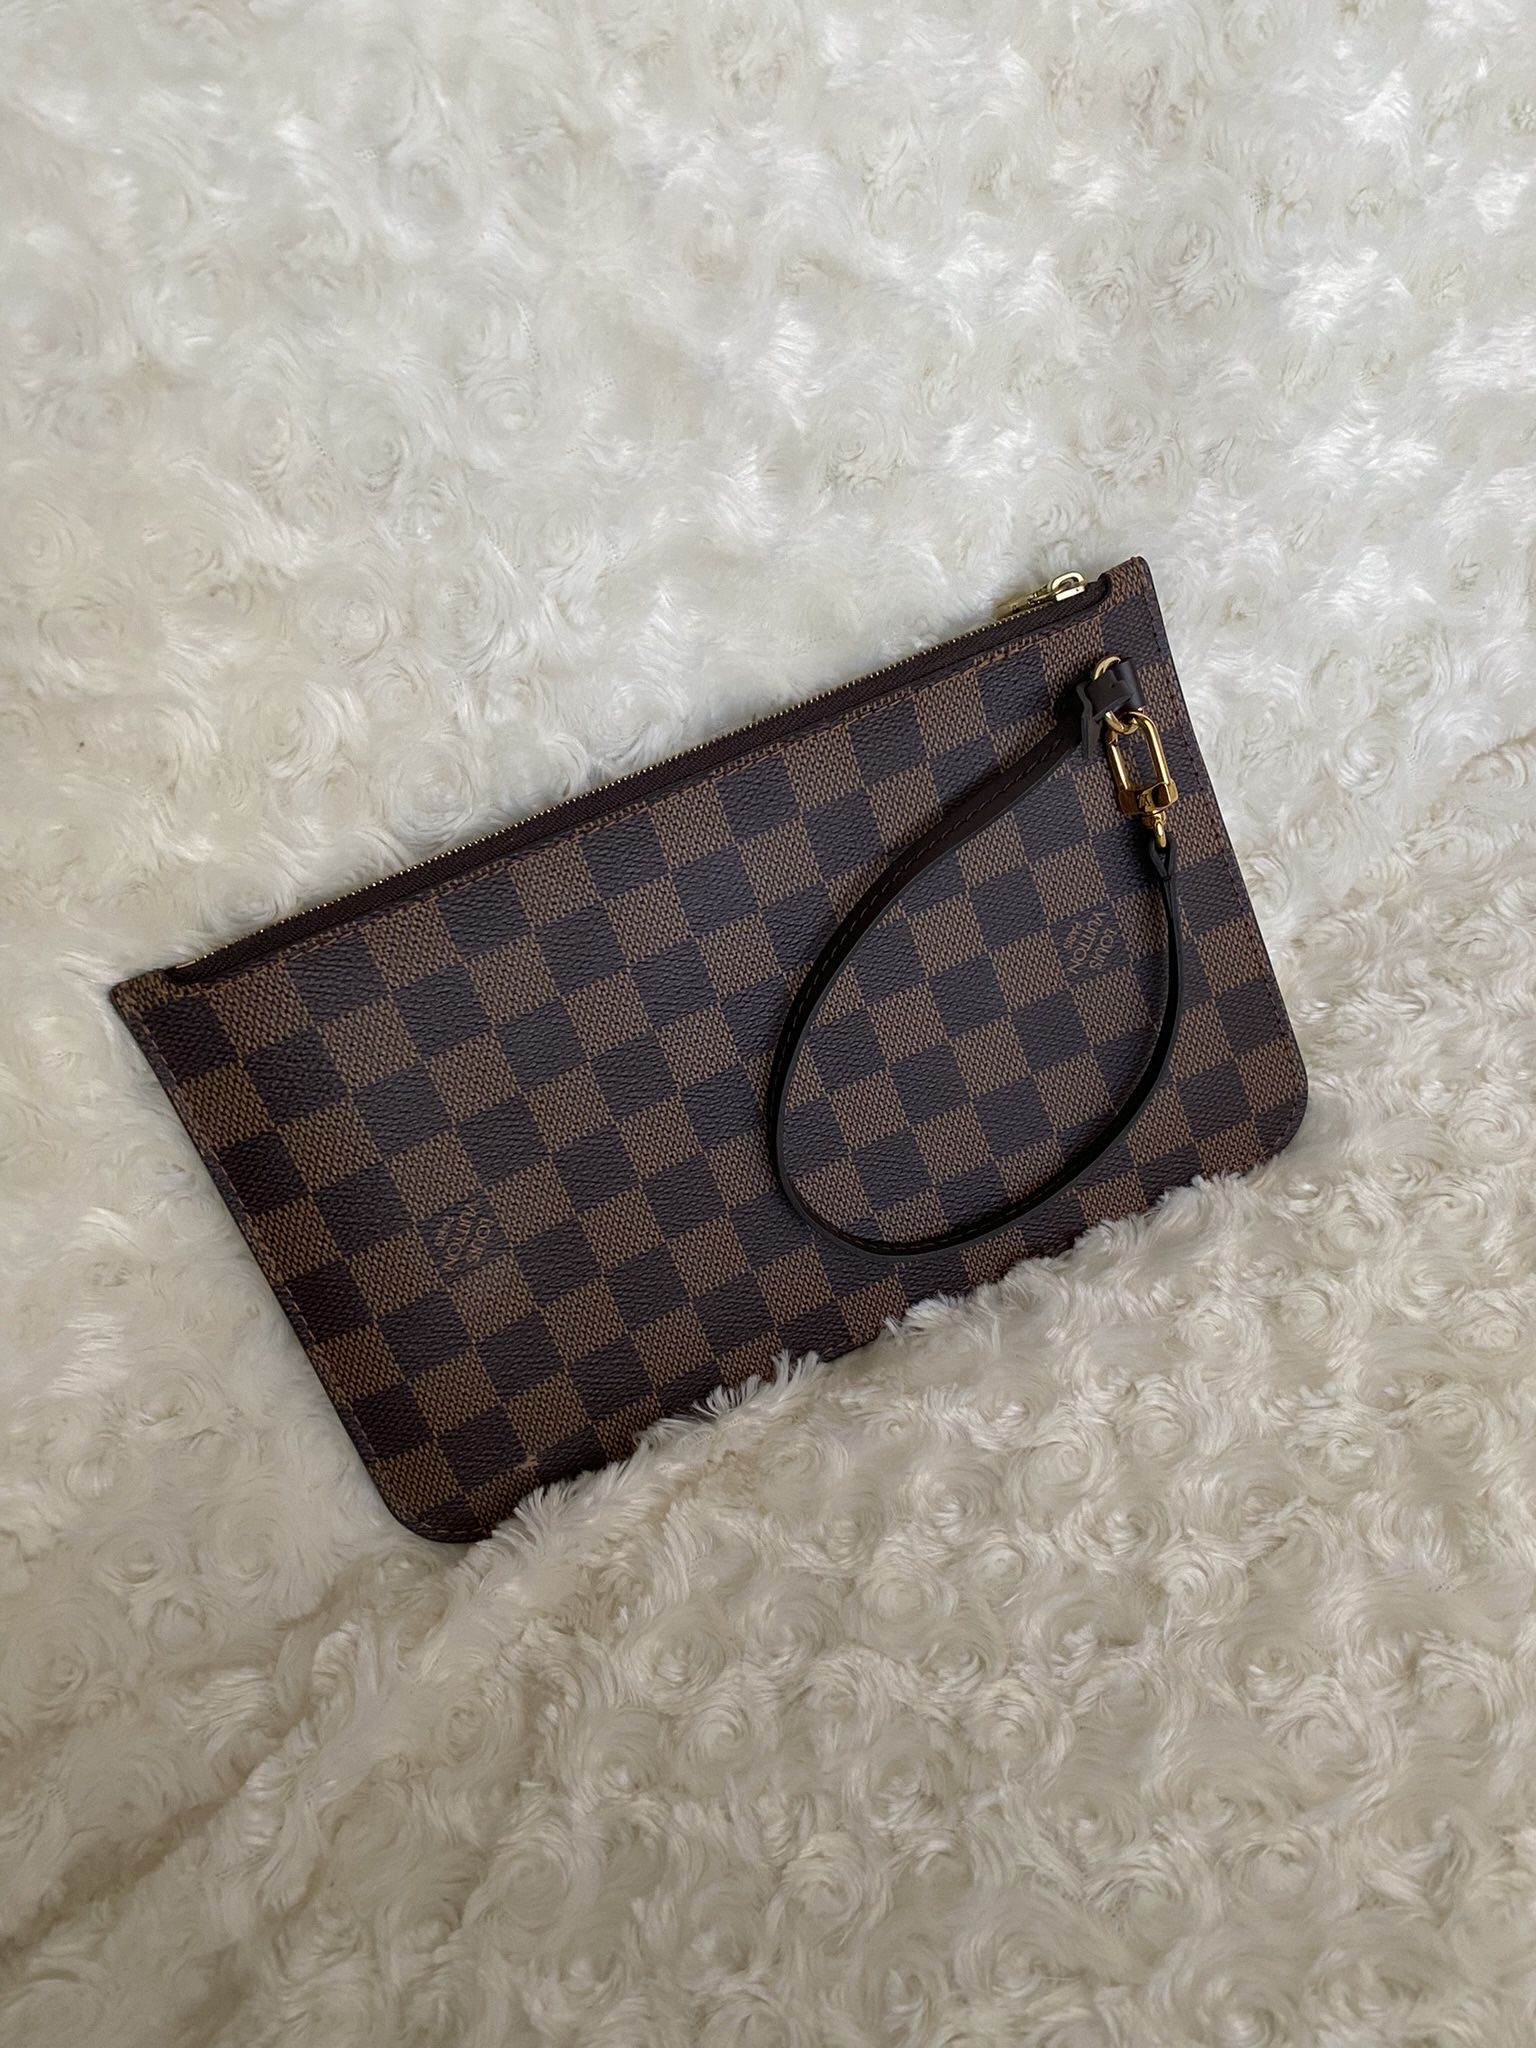 Authentic Louis Vuitton NeverFull Pouch for Sale in Jacksonville, FL